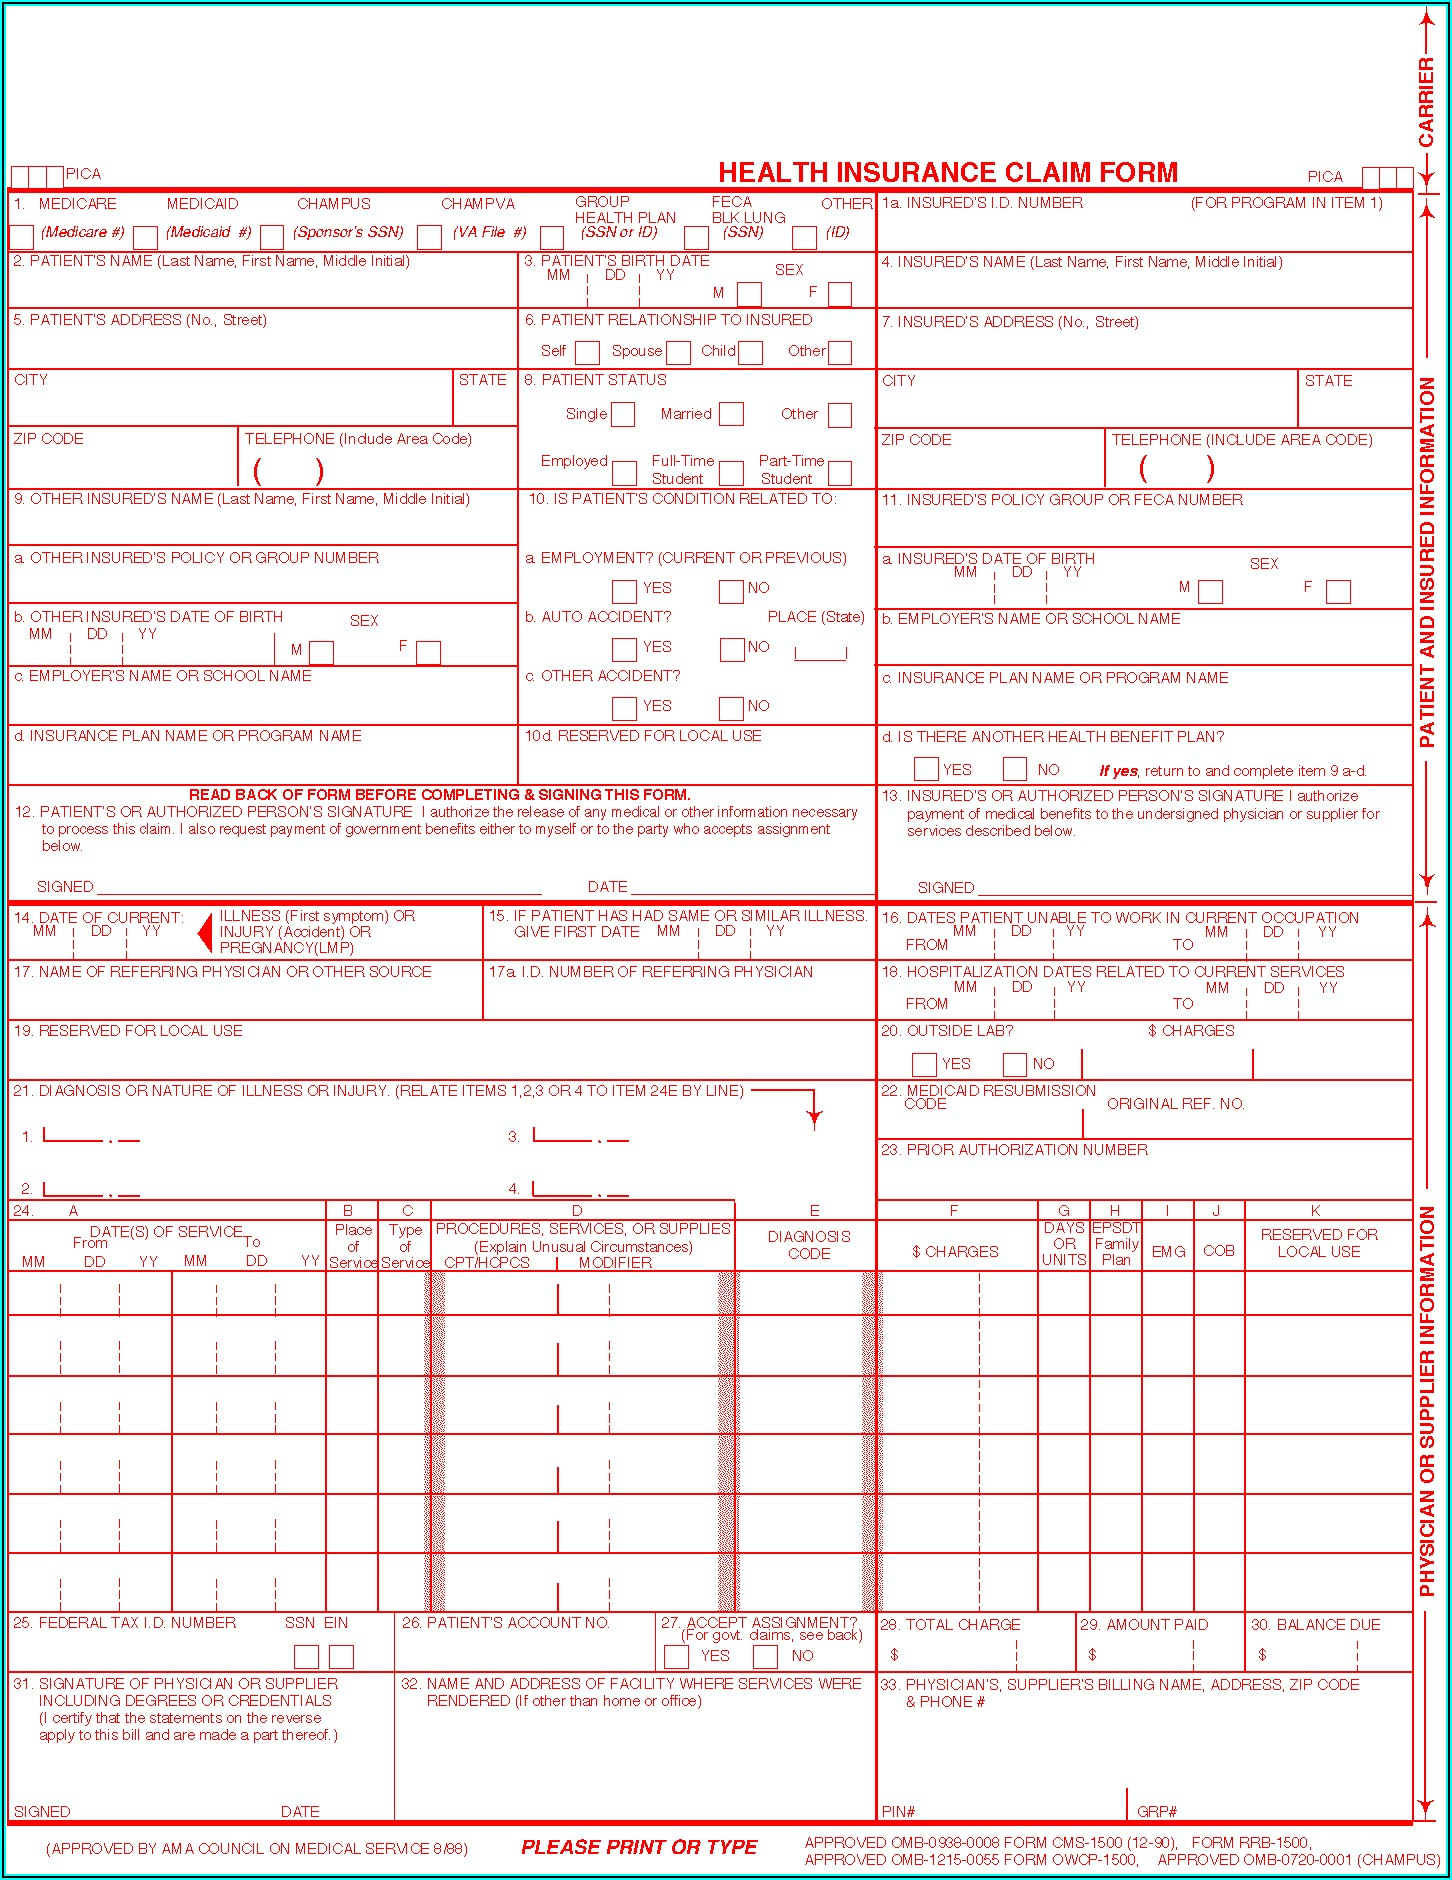 Blank Fillable Cms 1500 Form